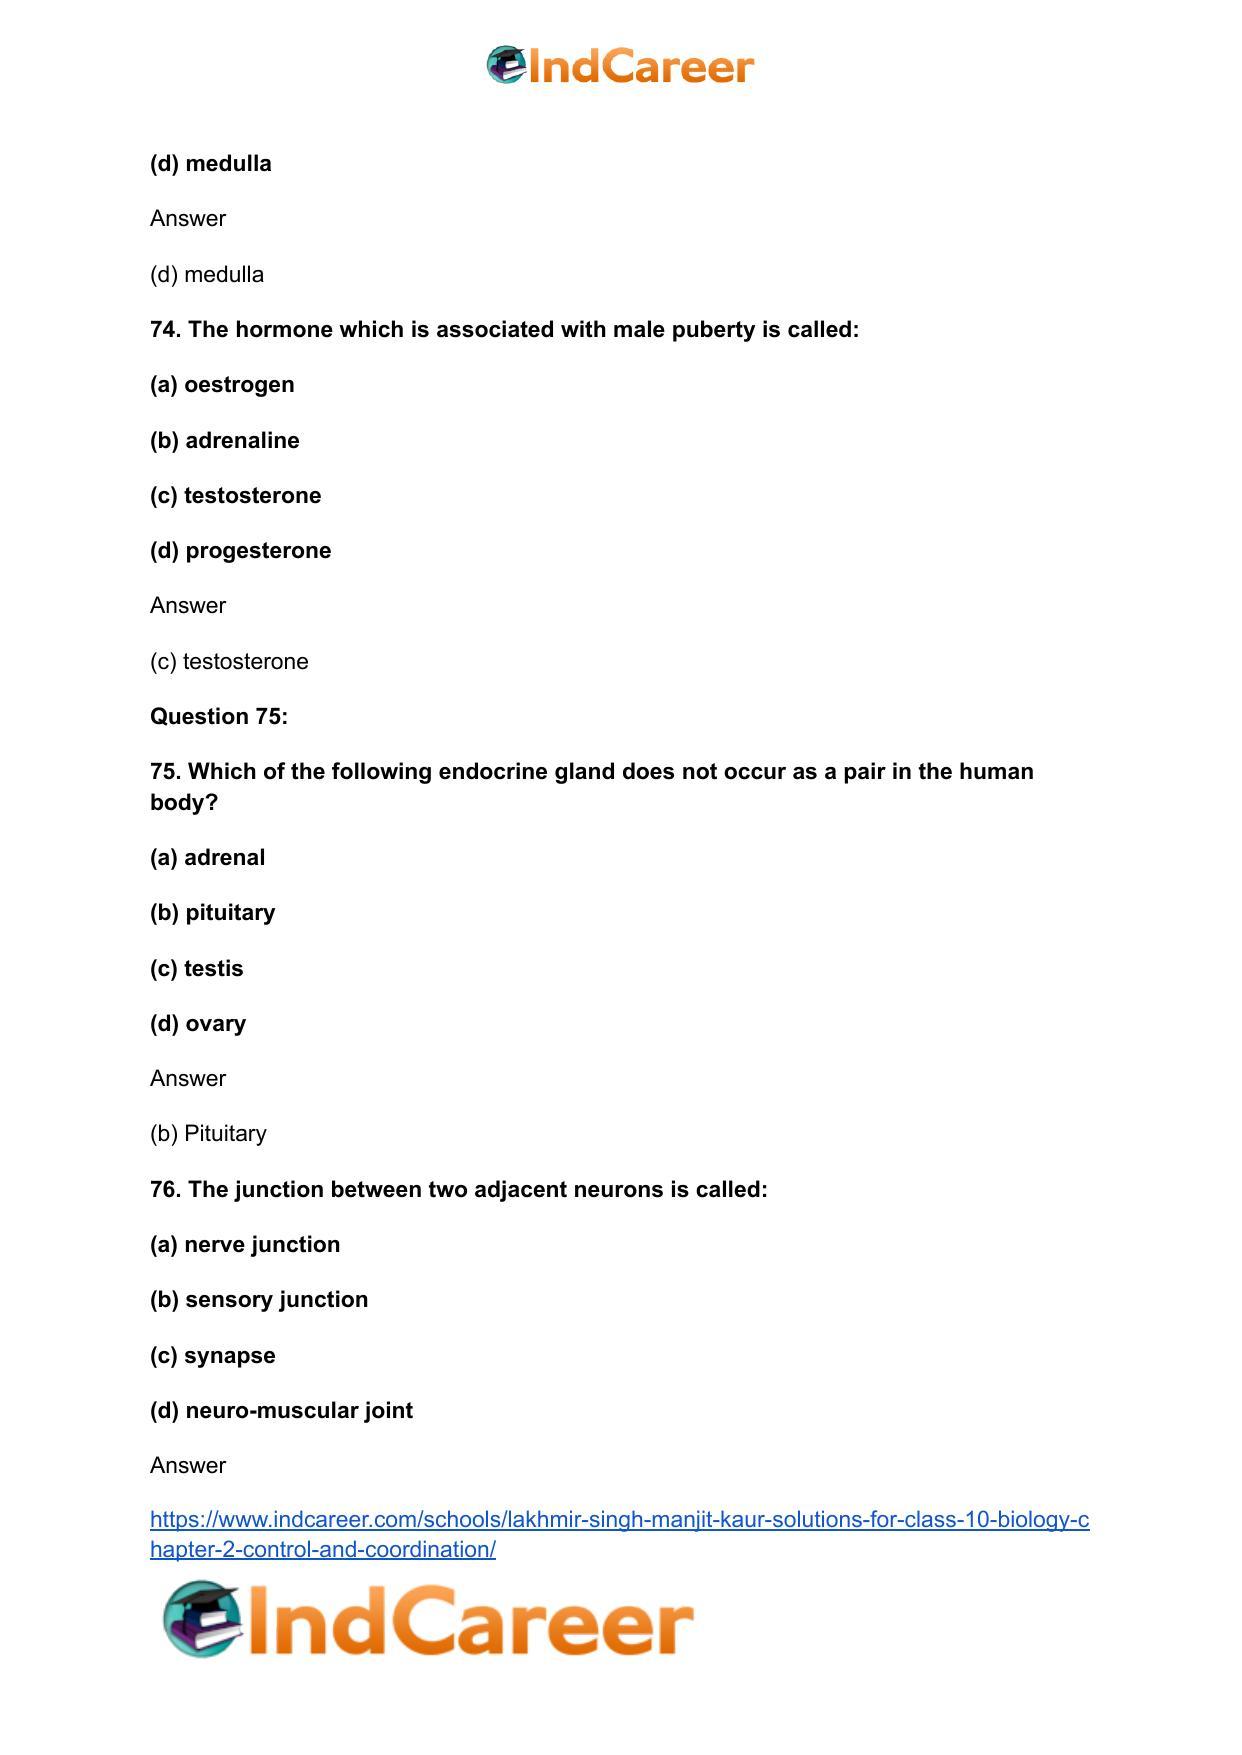 Lakhmir Singh Manjit Kaur  Solutions for Class 10 Biology: Chapter 2- Control And Coordination - Page 53